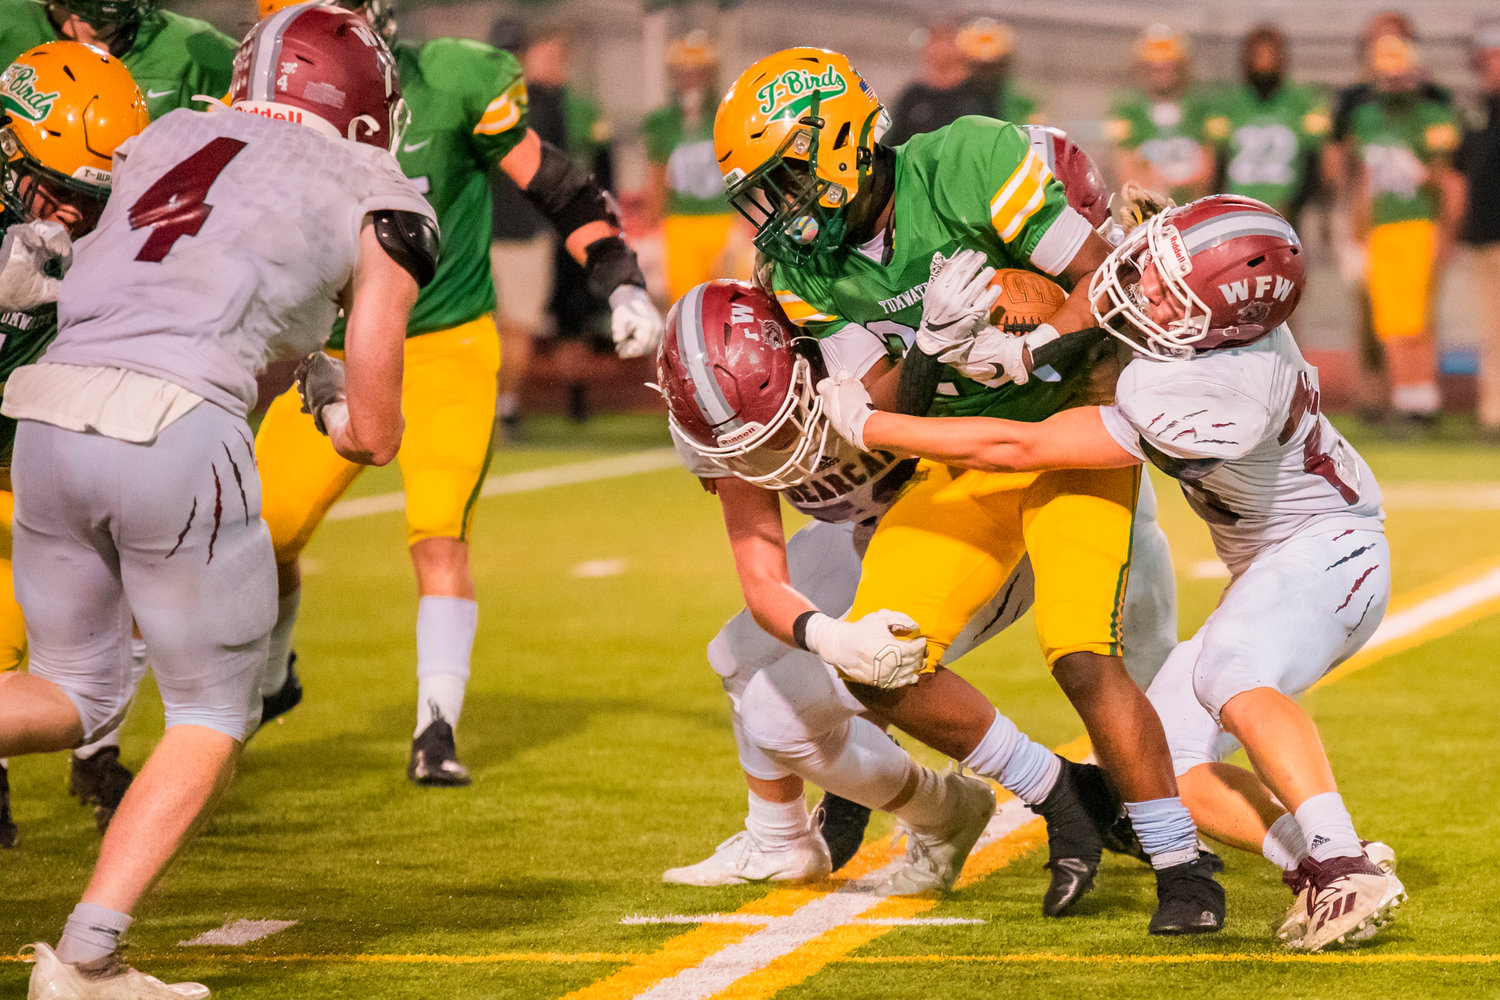 Tumwater’s Carlos Matheny (25) is wrapped up by Bearcat defenders while running with the football during a game Friday night.